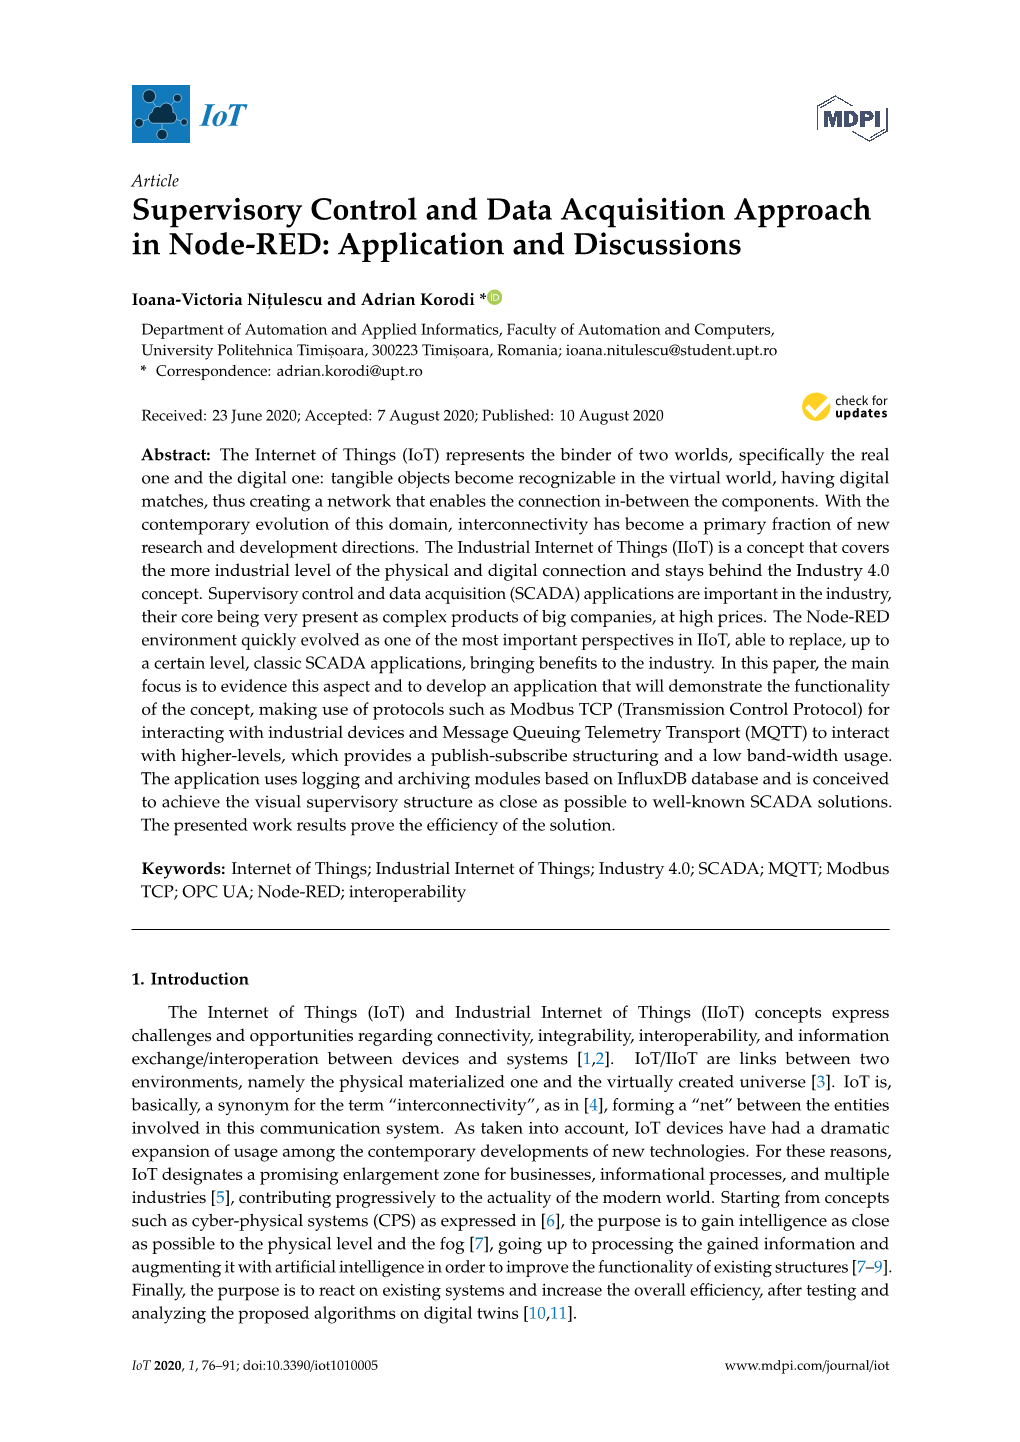 Supervisory Control and Data Acquisition Approach in Node-RED: Application and Discussions